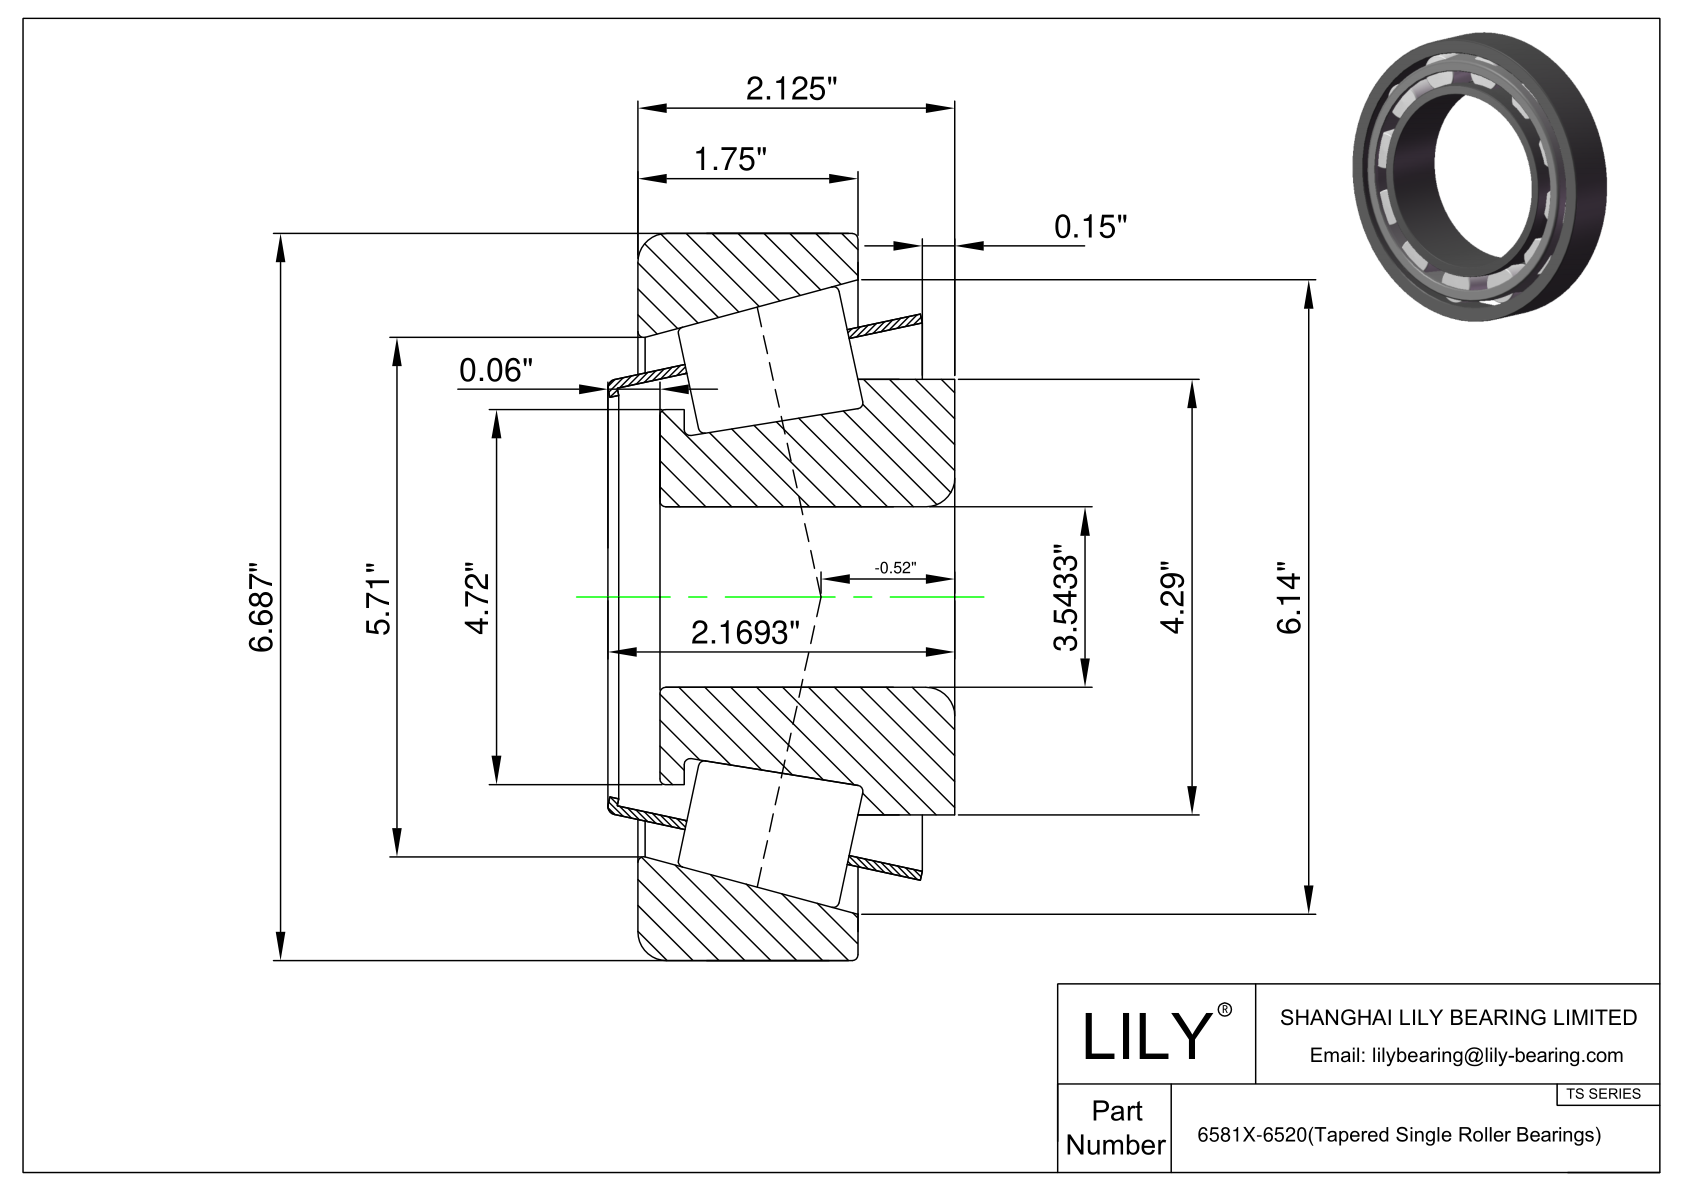 6581X-6520 TS (Tapered Single Roller Bearings) (Imperial) cad drawing